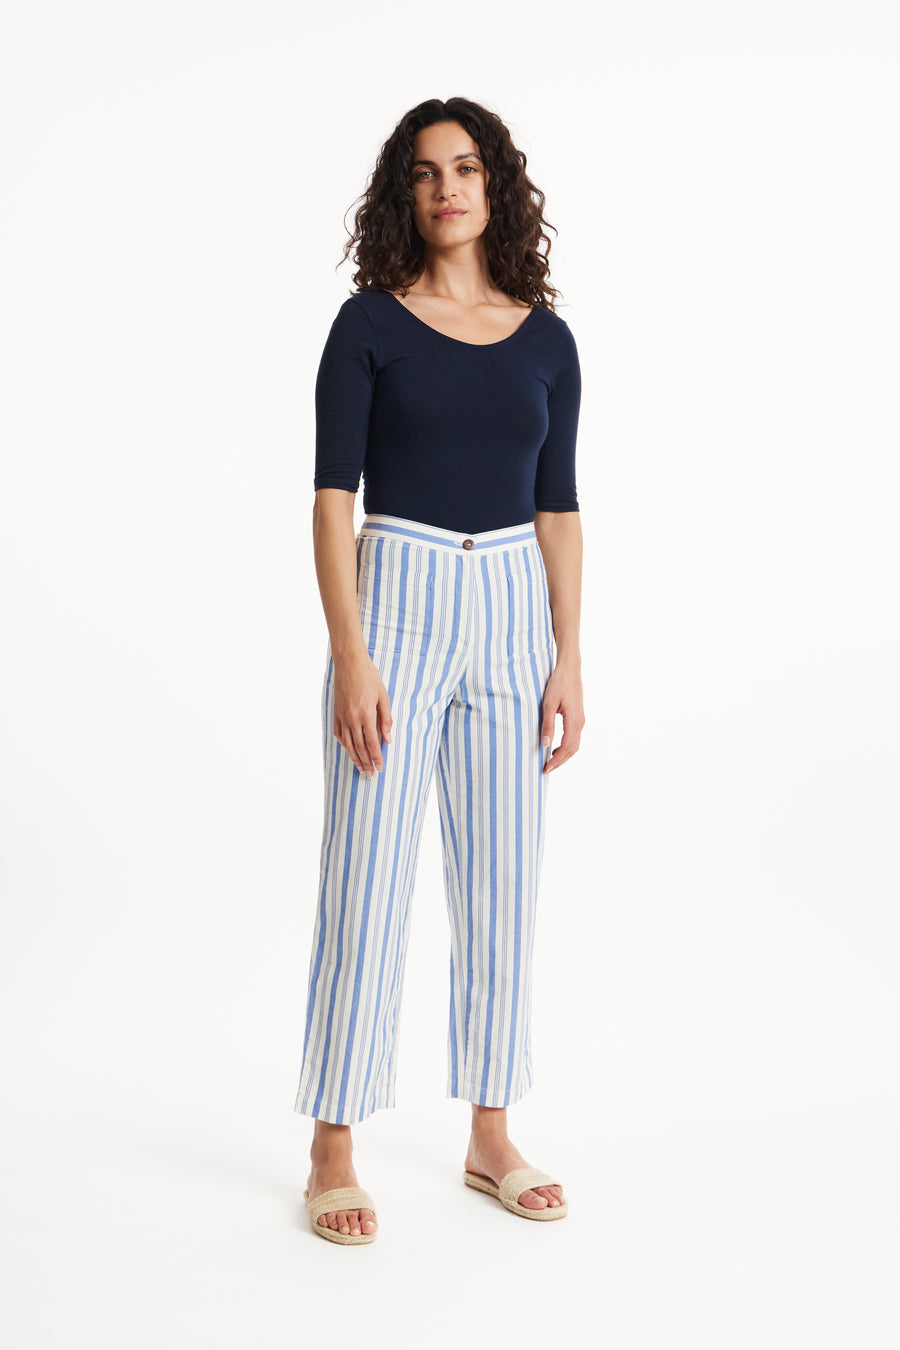 Buy INFISPACE Women High Waist Blue Striped Palazzo Trouser Pants (26  inches) at Amazon.in